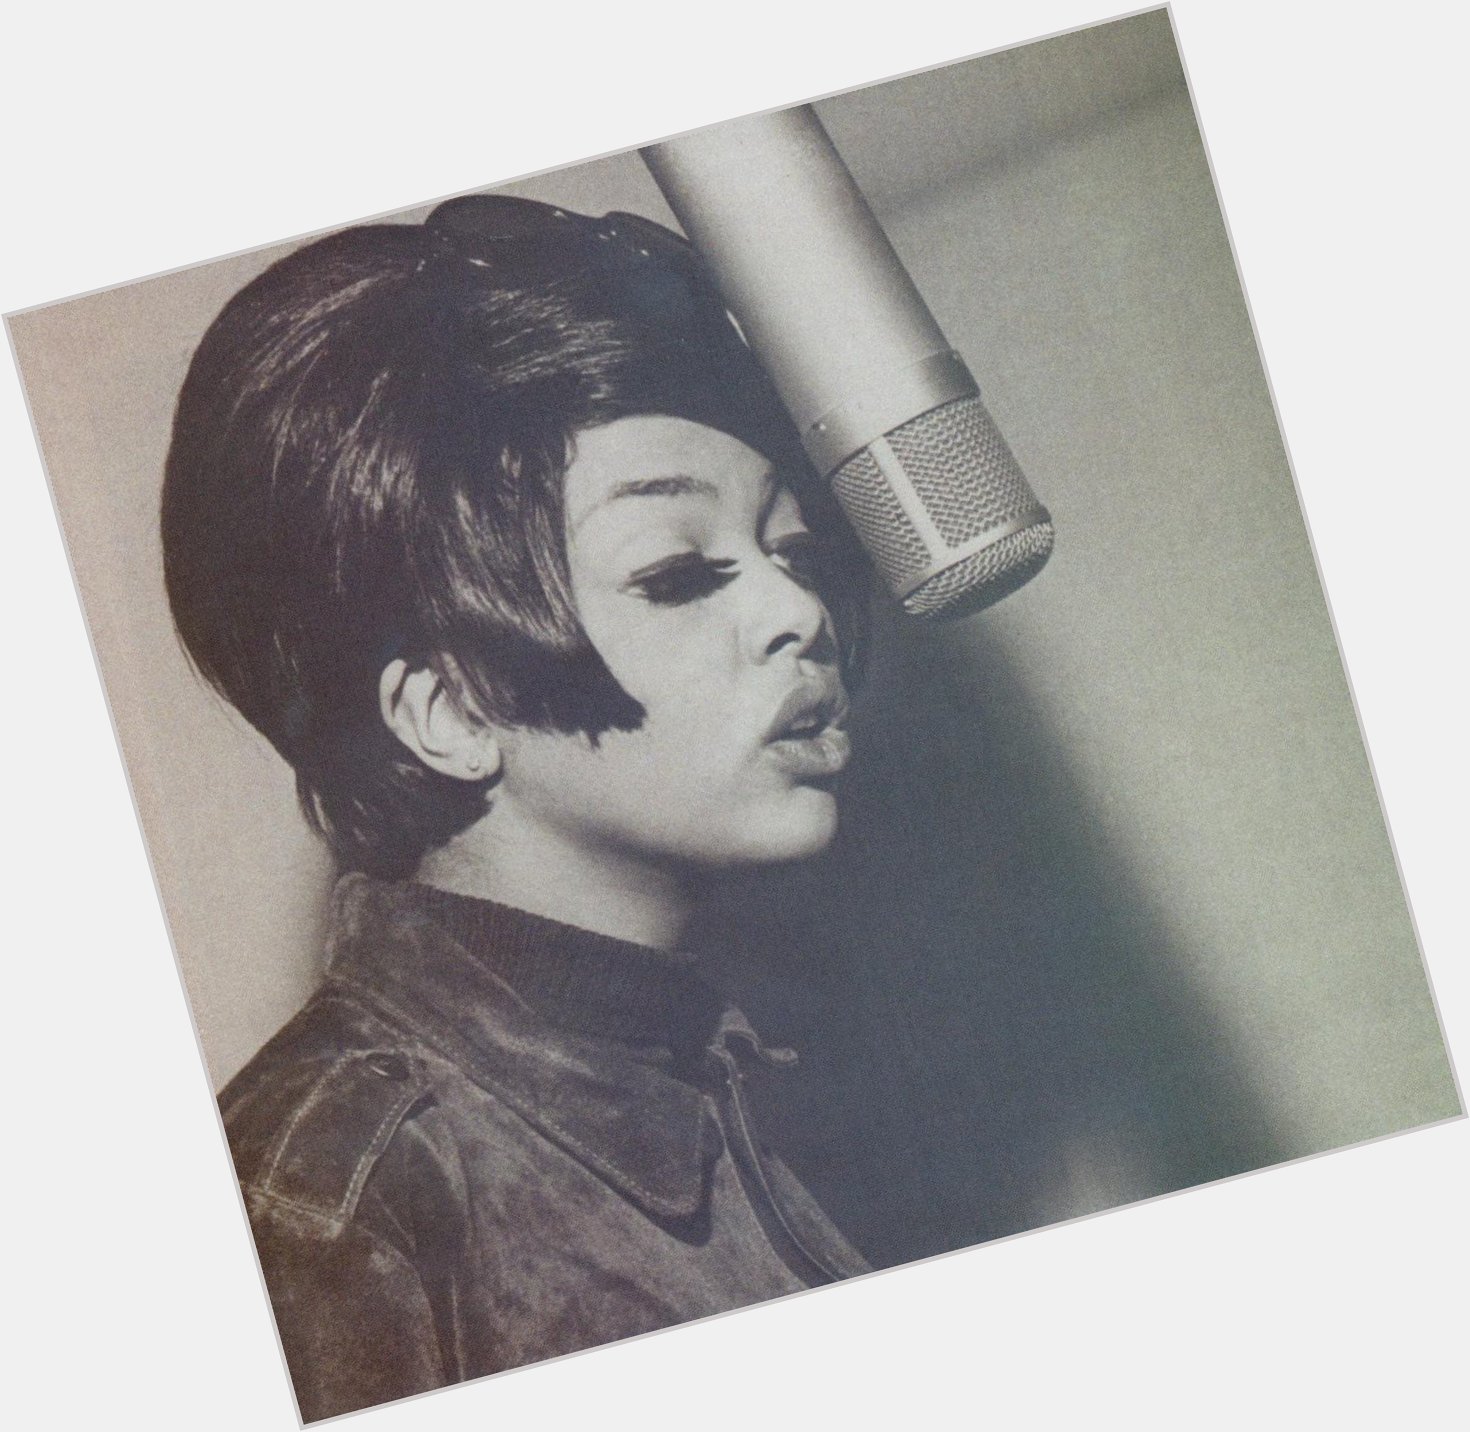 HAPPY BIRTHDAY TAMMI TERRELL (04.29.1945)! She is in the \"Songbirds of Motown\" category of The Satin Dolls Exhibit! 